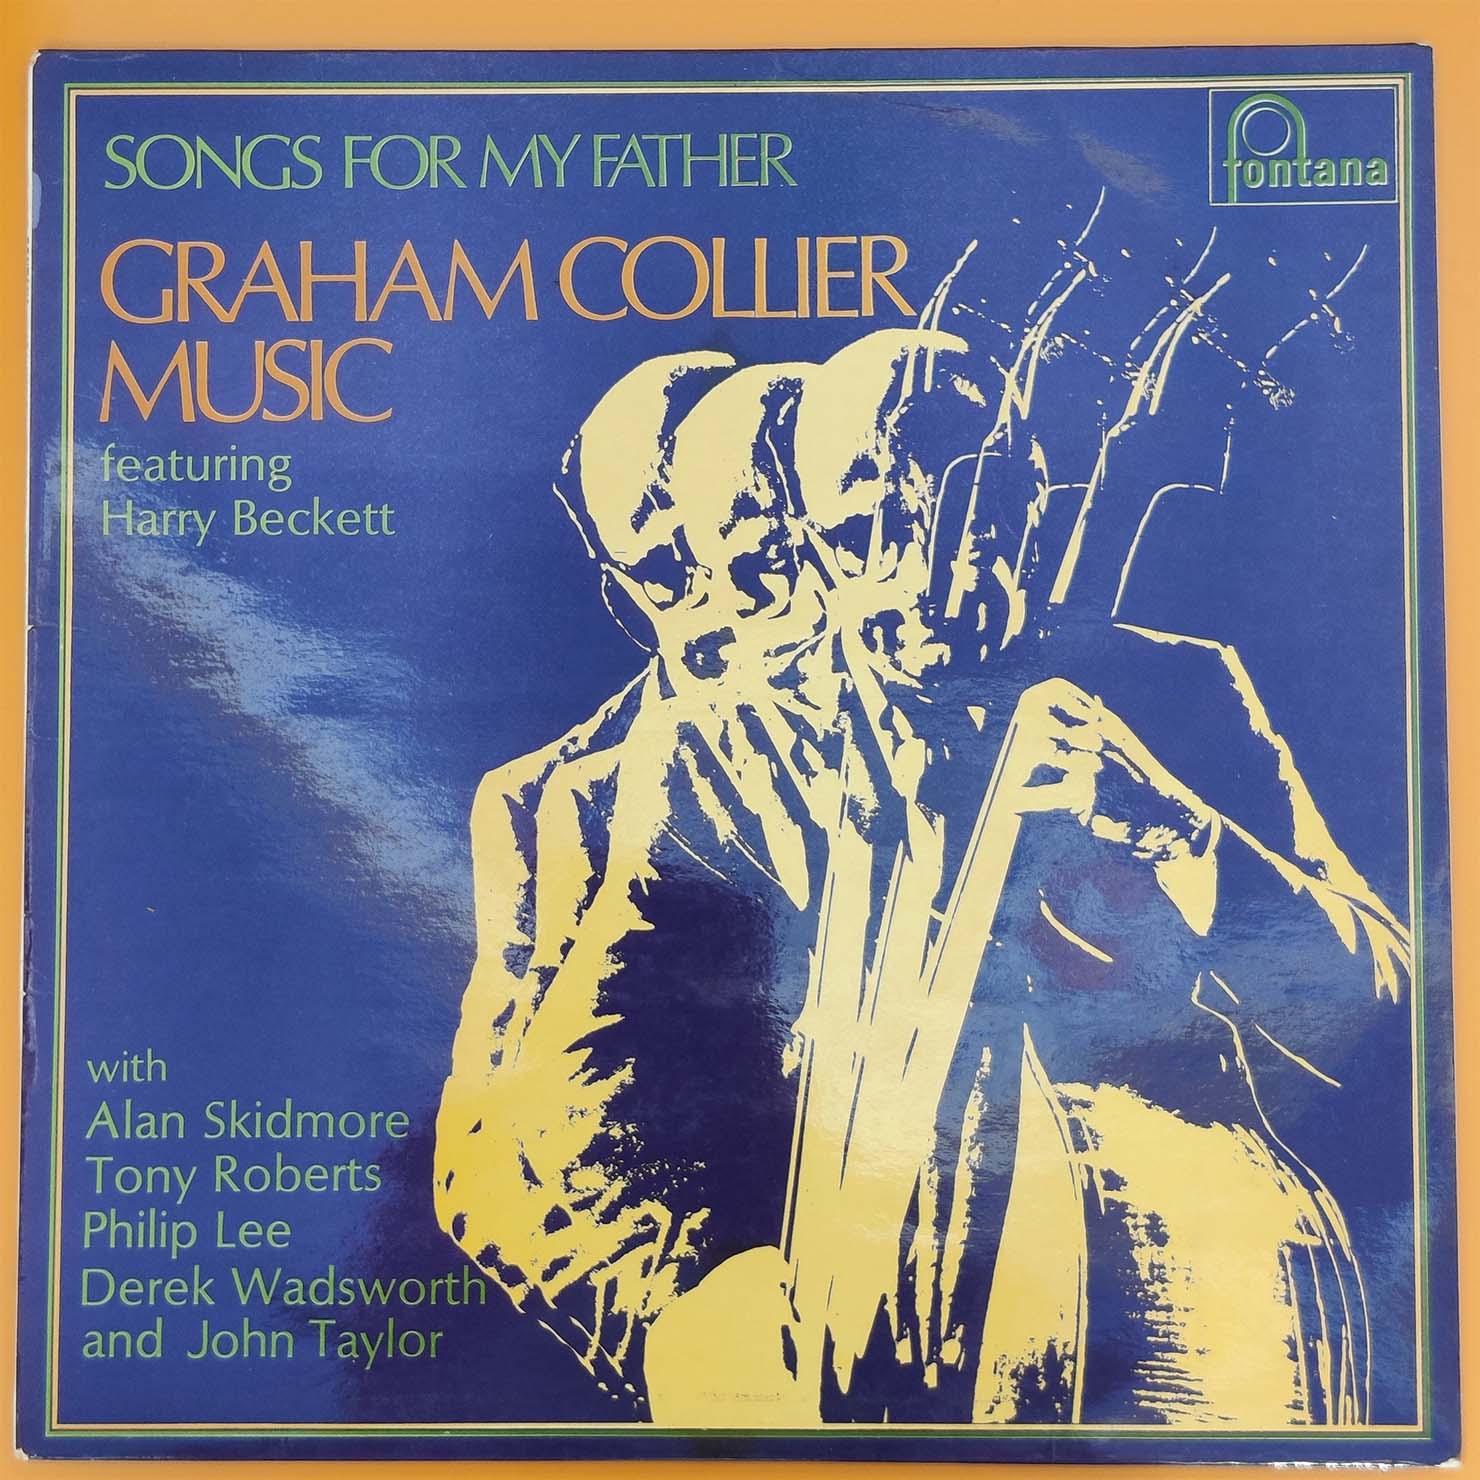 Graham Collier Music『Songs For My Father』